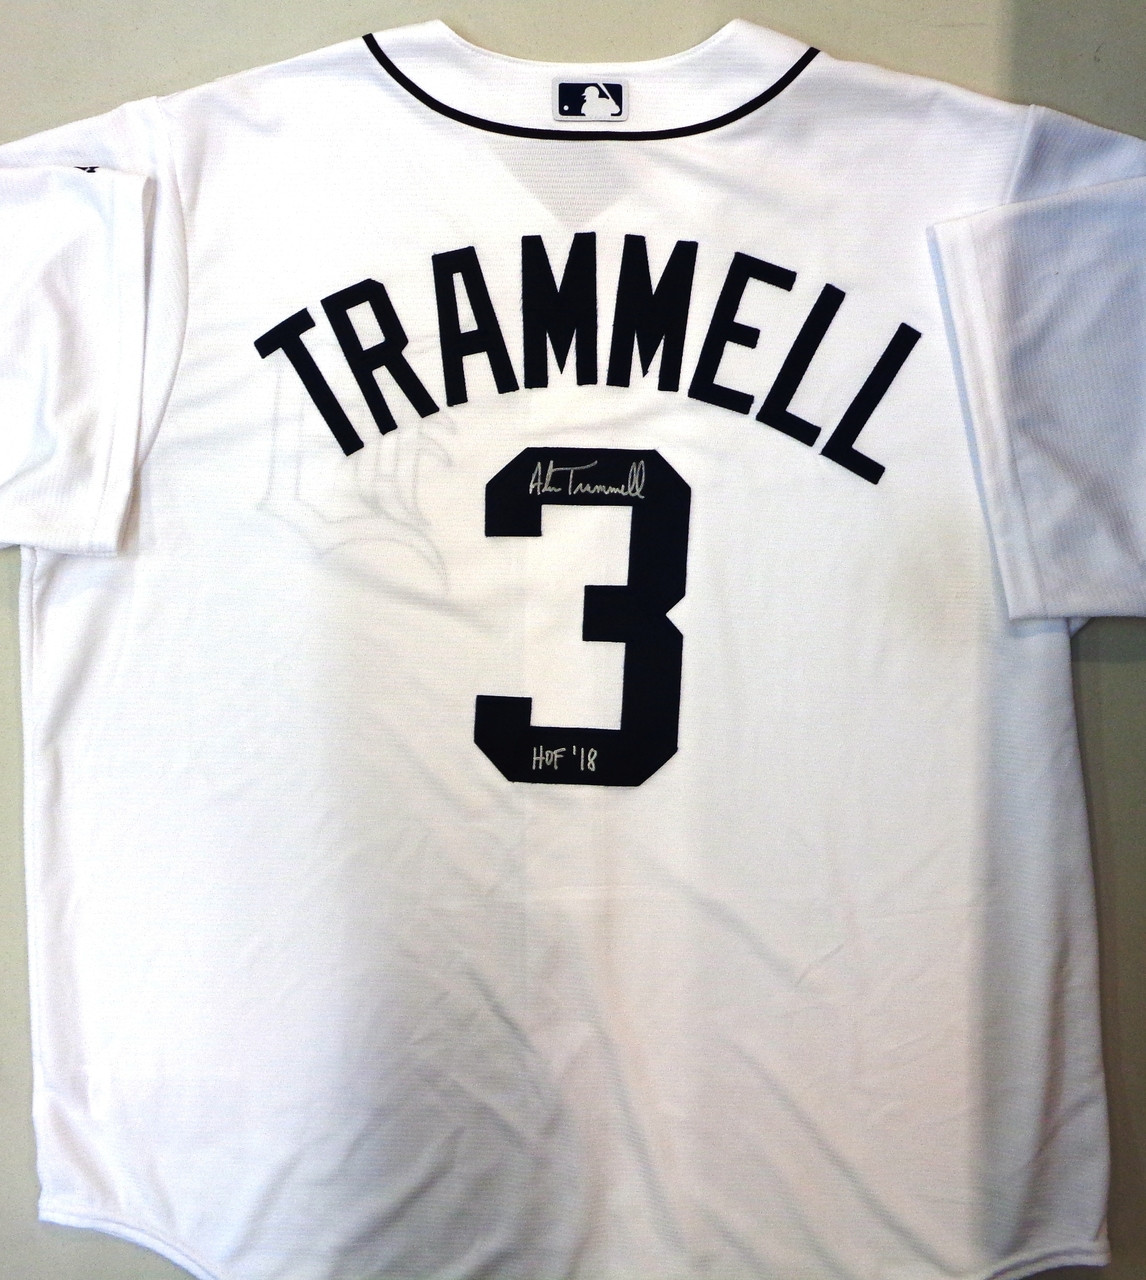 Alan Trammell Autographed Detroit Tigers Nike Jersey Inscribed with HOF 18